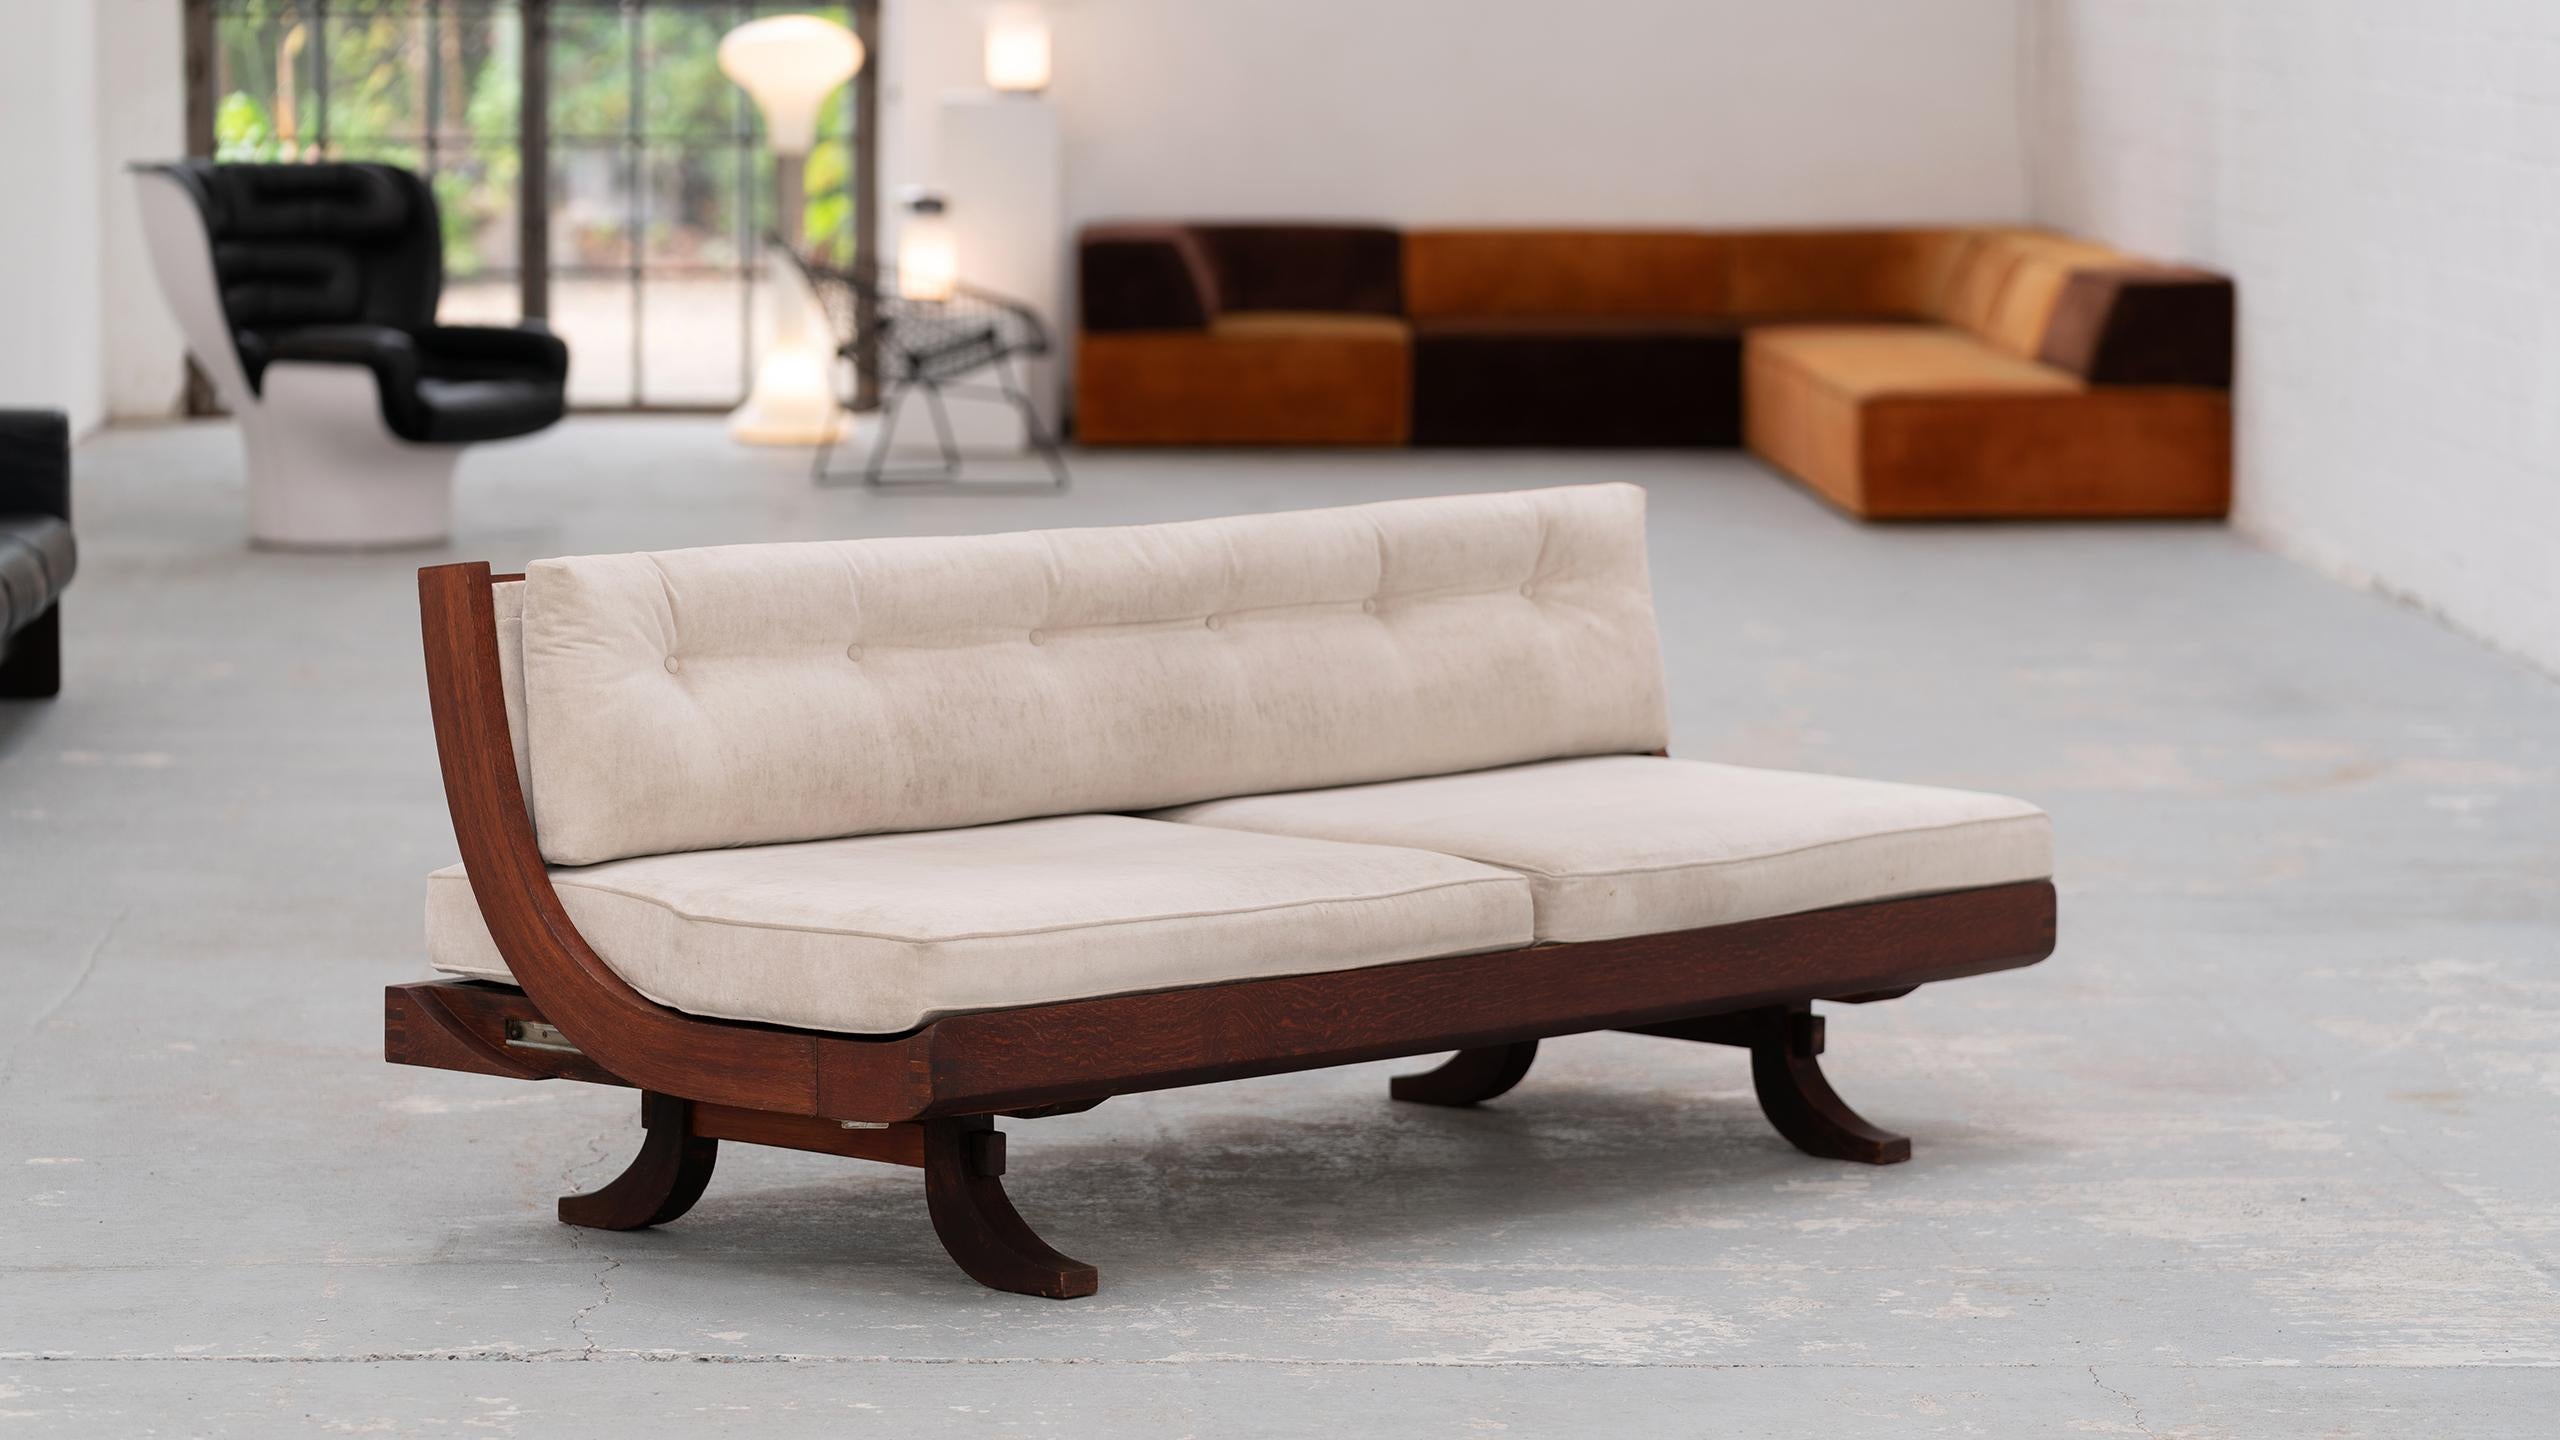 Brazilian Daybed & Sofa, 1966, Sophisticated Wood Details, Lounge & Relax 8